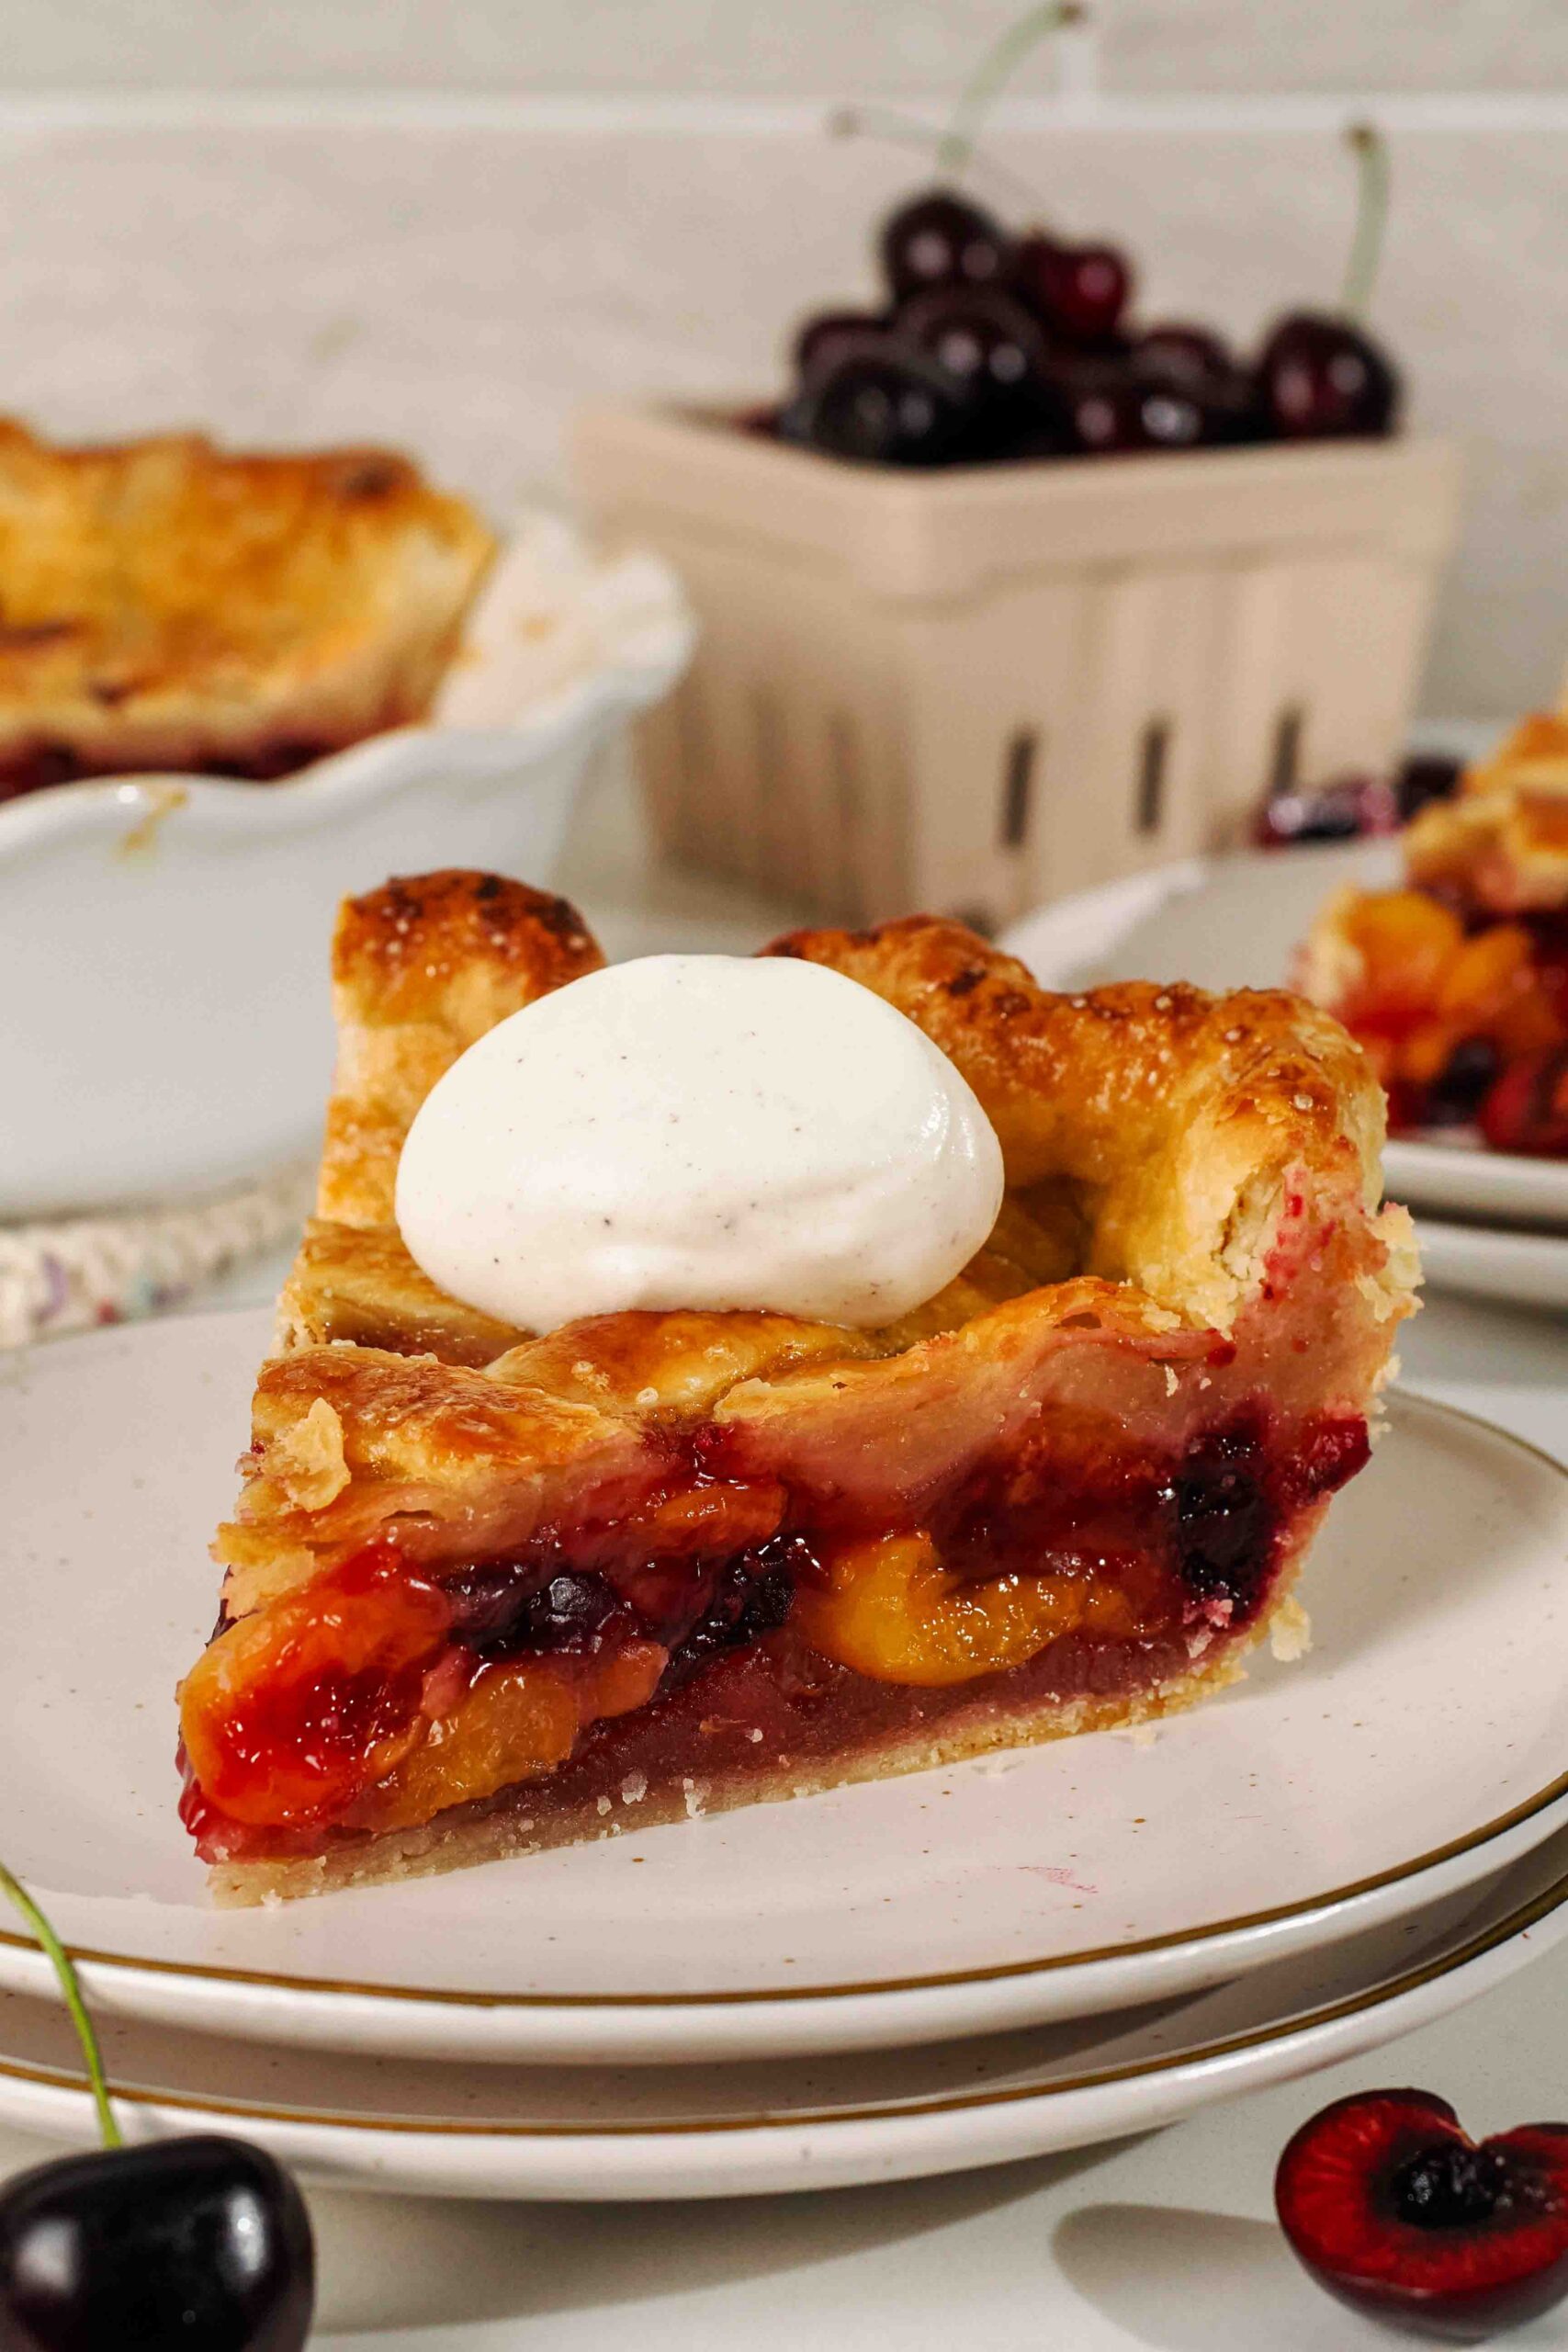 A slice of cherry pie with vanilla whipped cream on top.